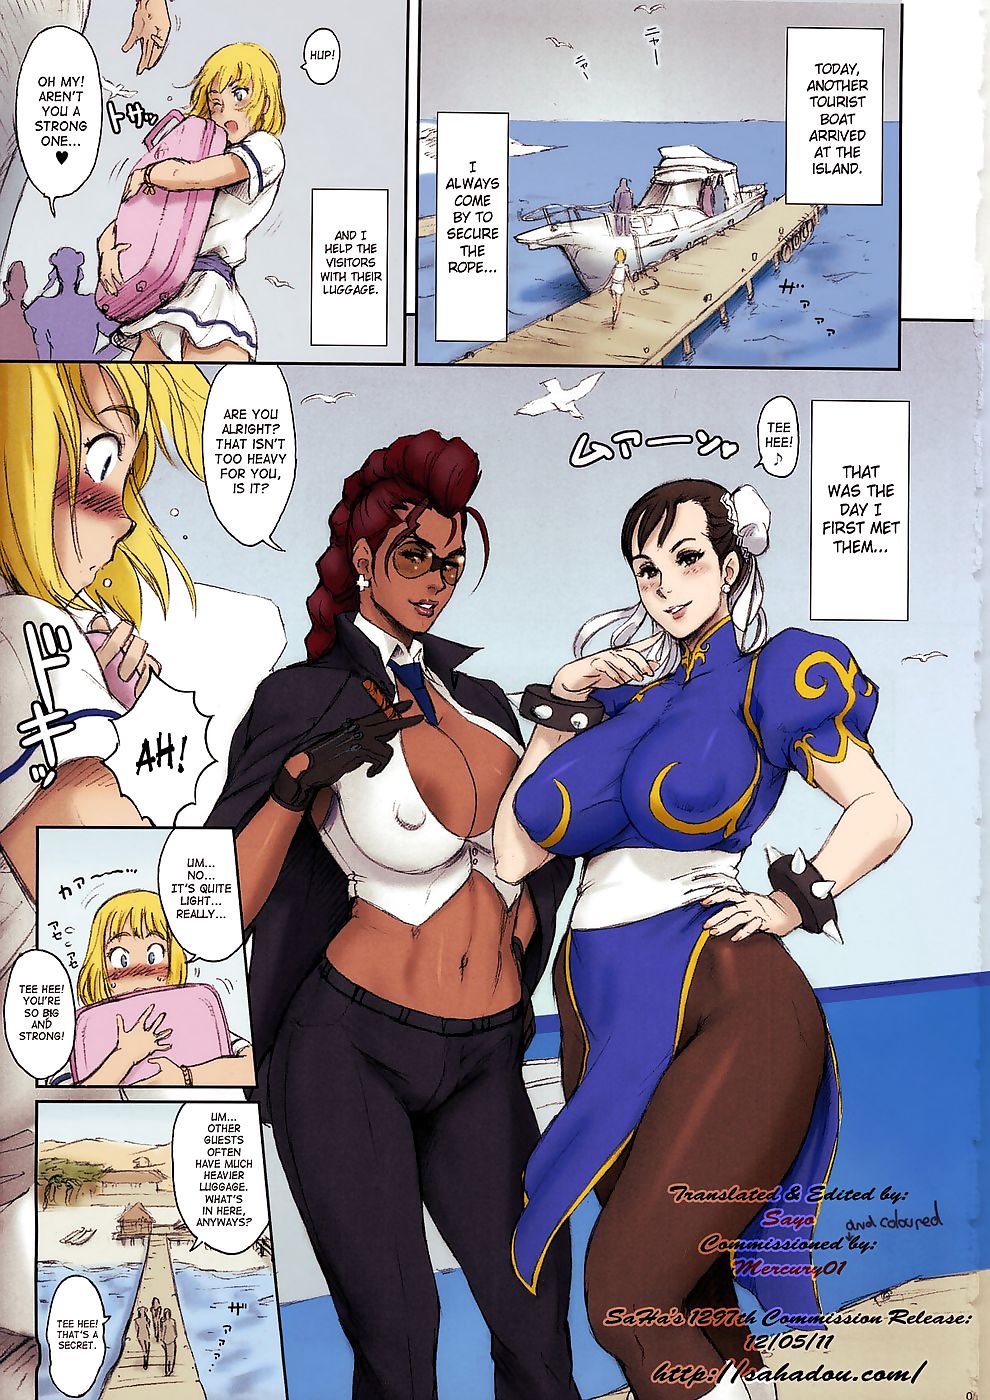 Nippon Impossible 2- Hentai page 1